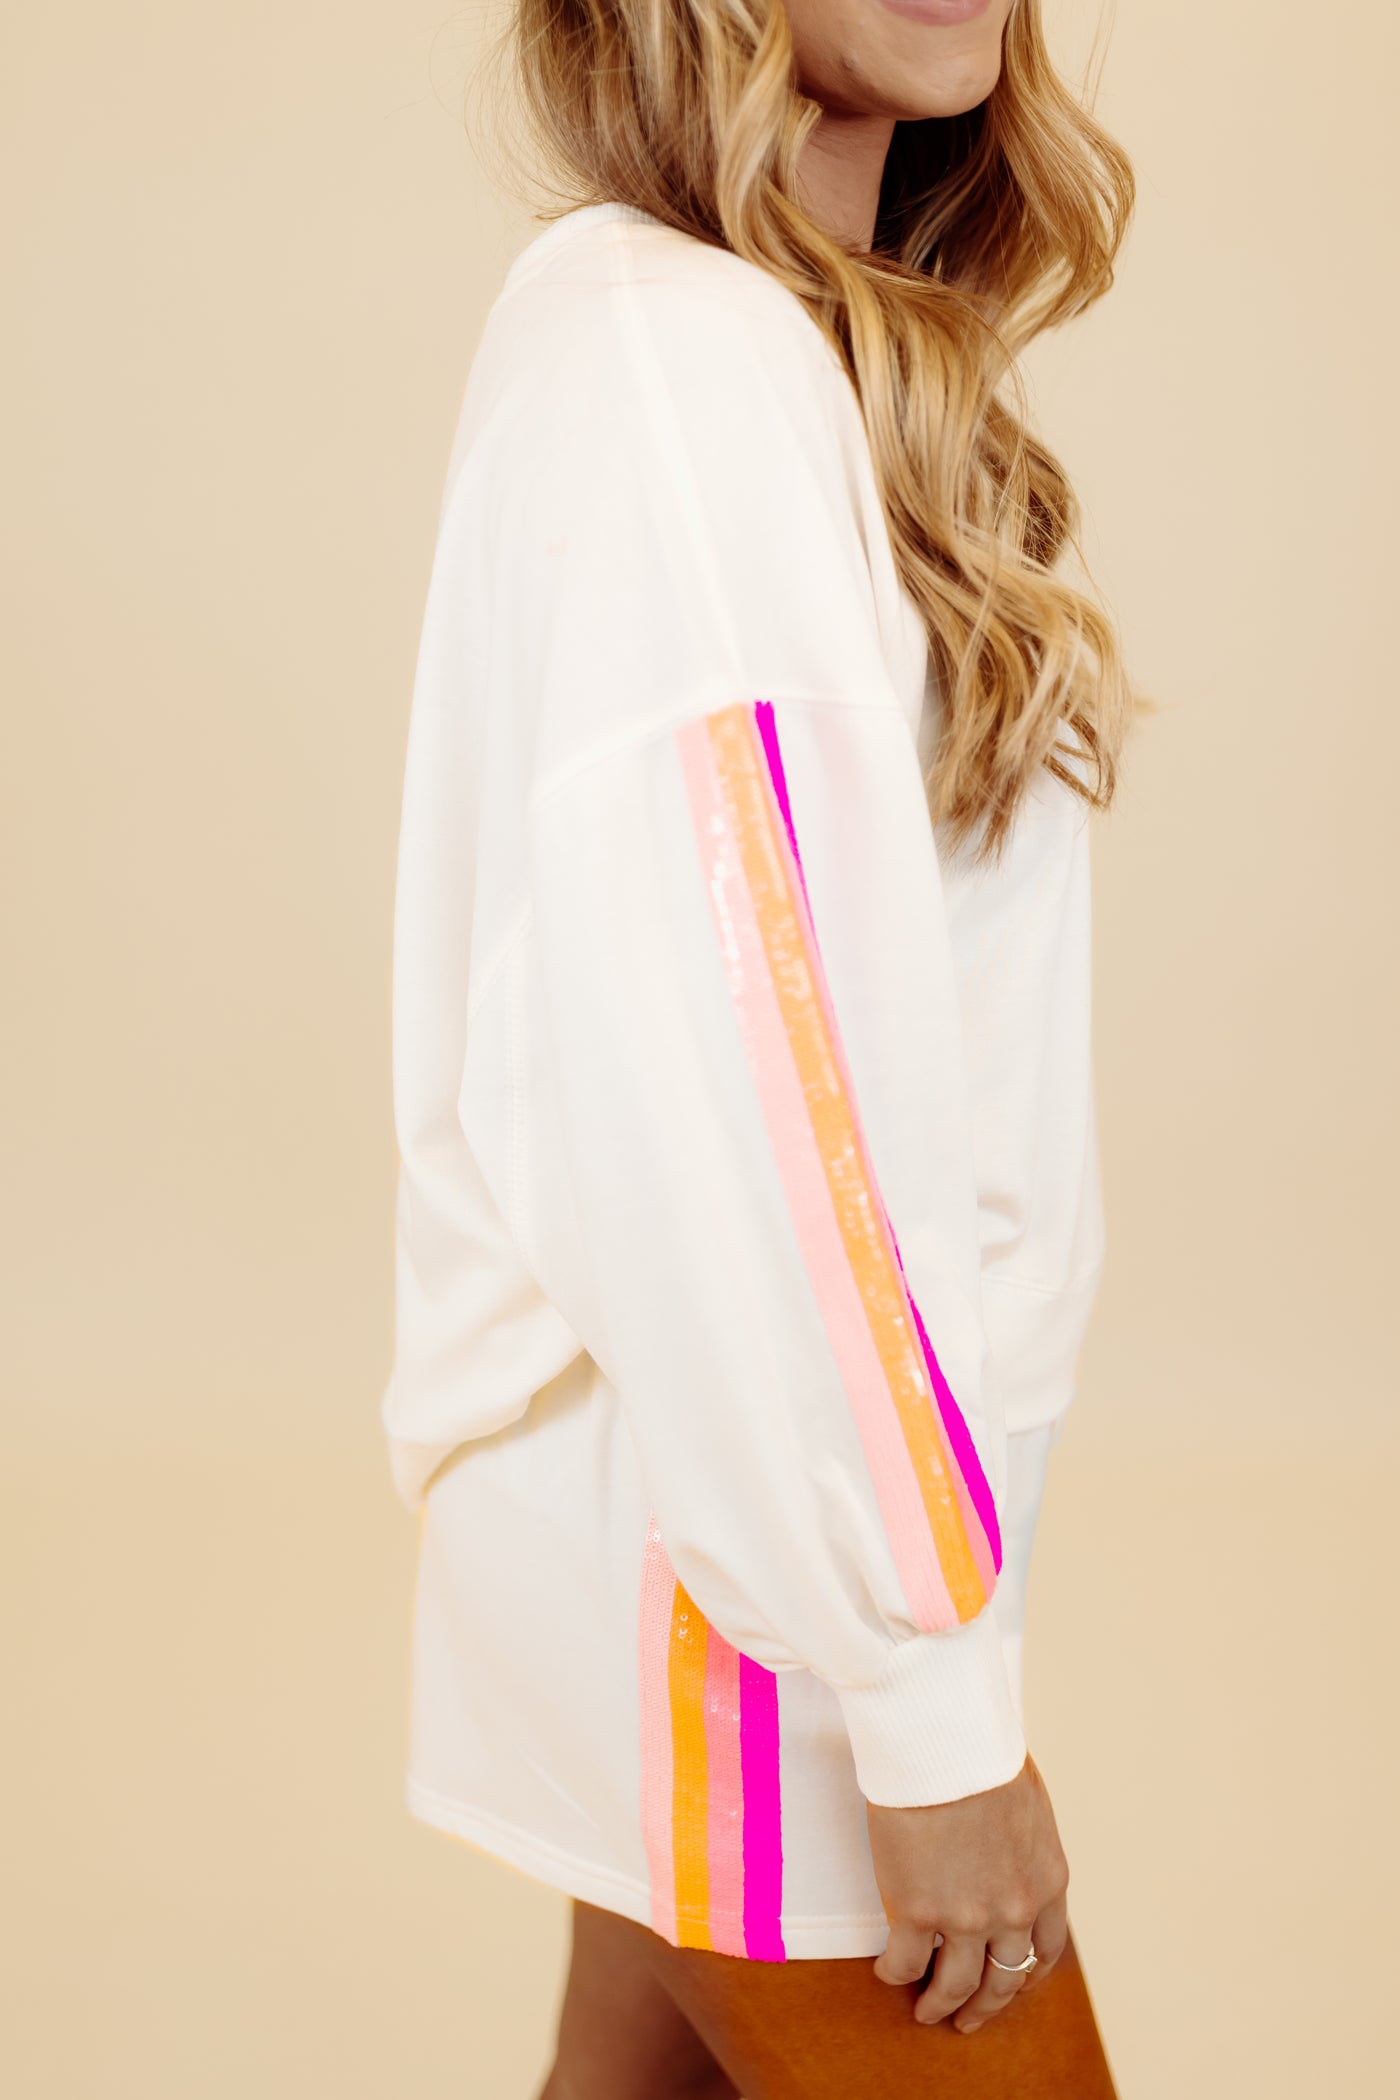 Mary Square Millie Neon Sequin Stripe Pullover and Short Set